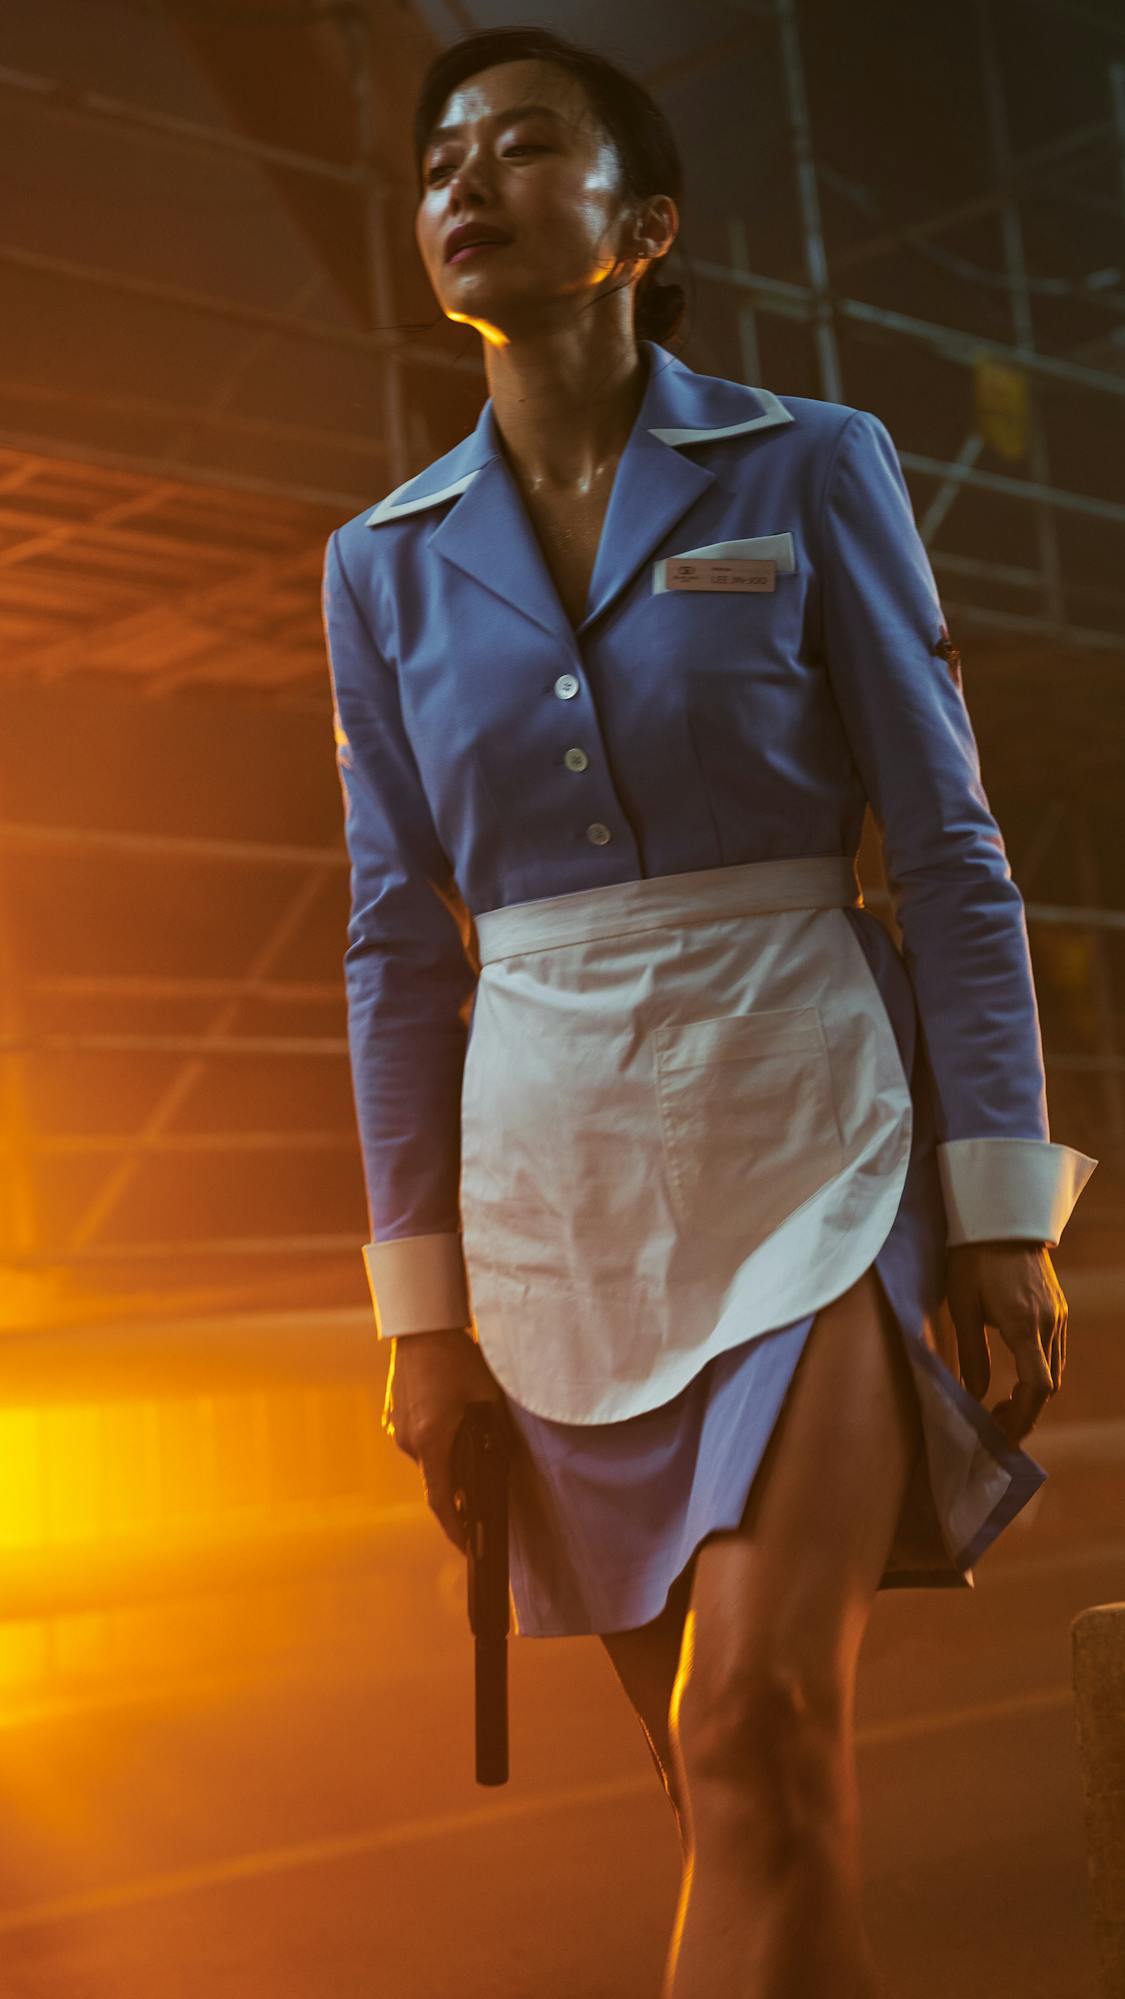 Jeon Do-yeon wears a blue and white waitress or maid uniform and holds a gun 